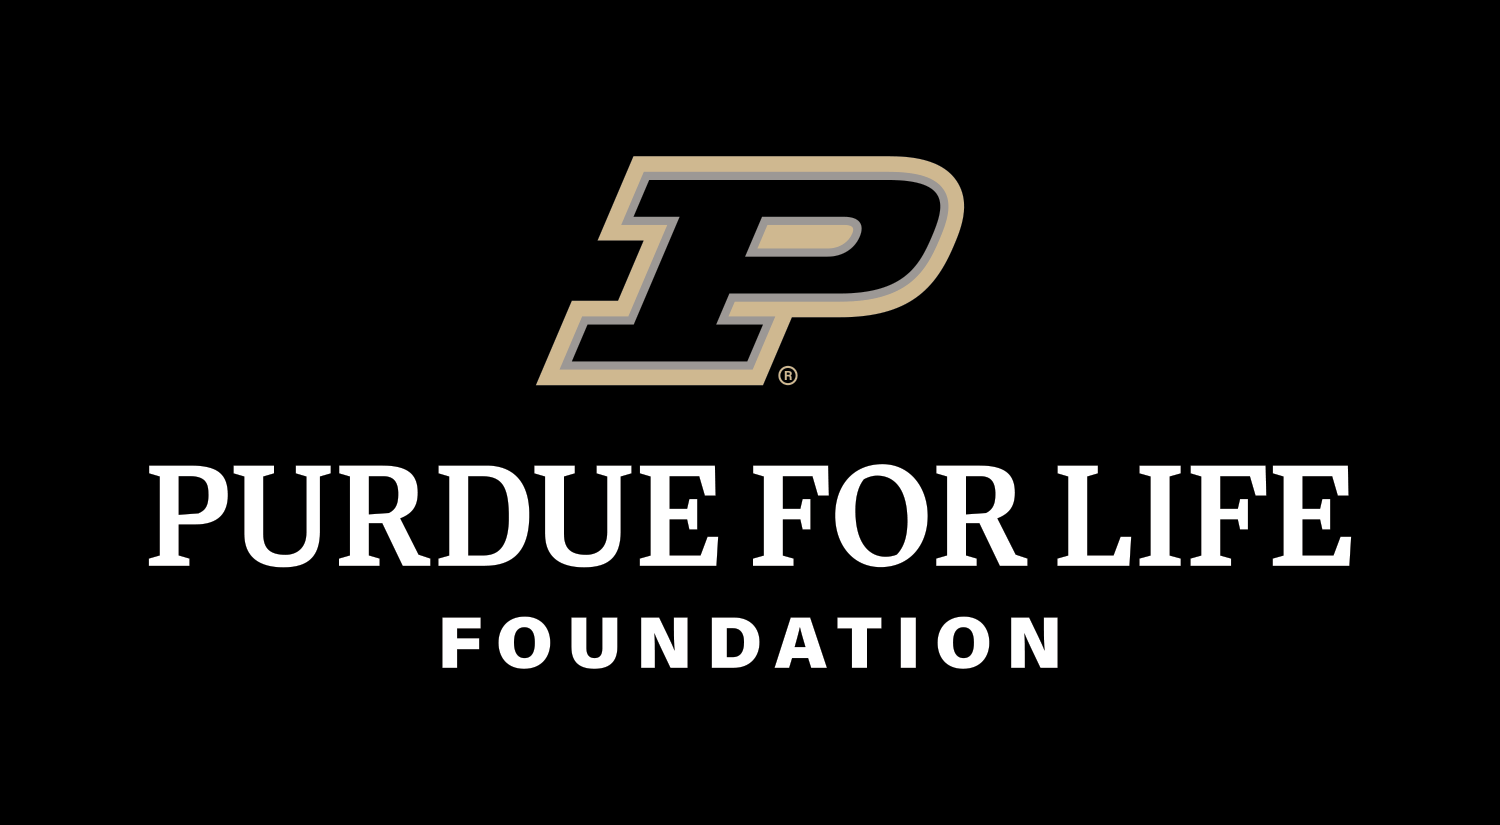 Purdue for Life